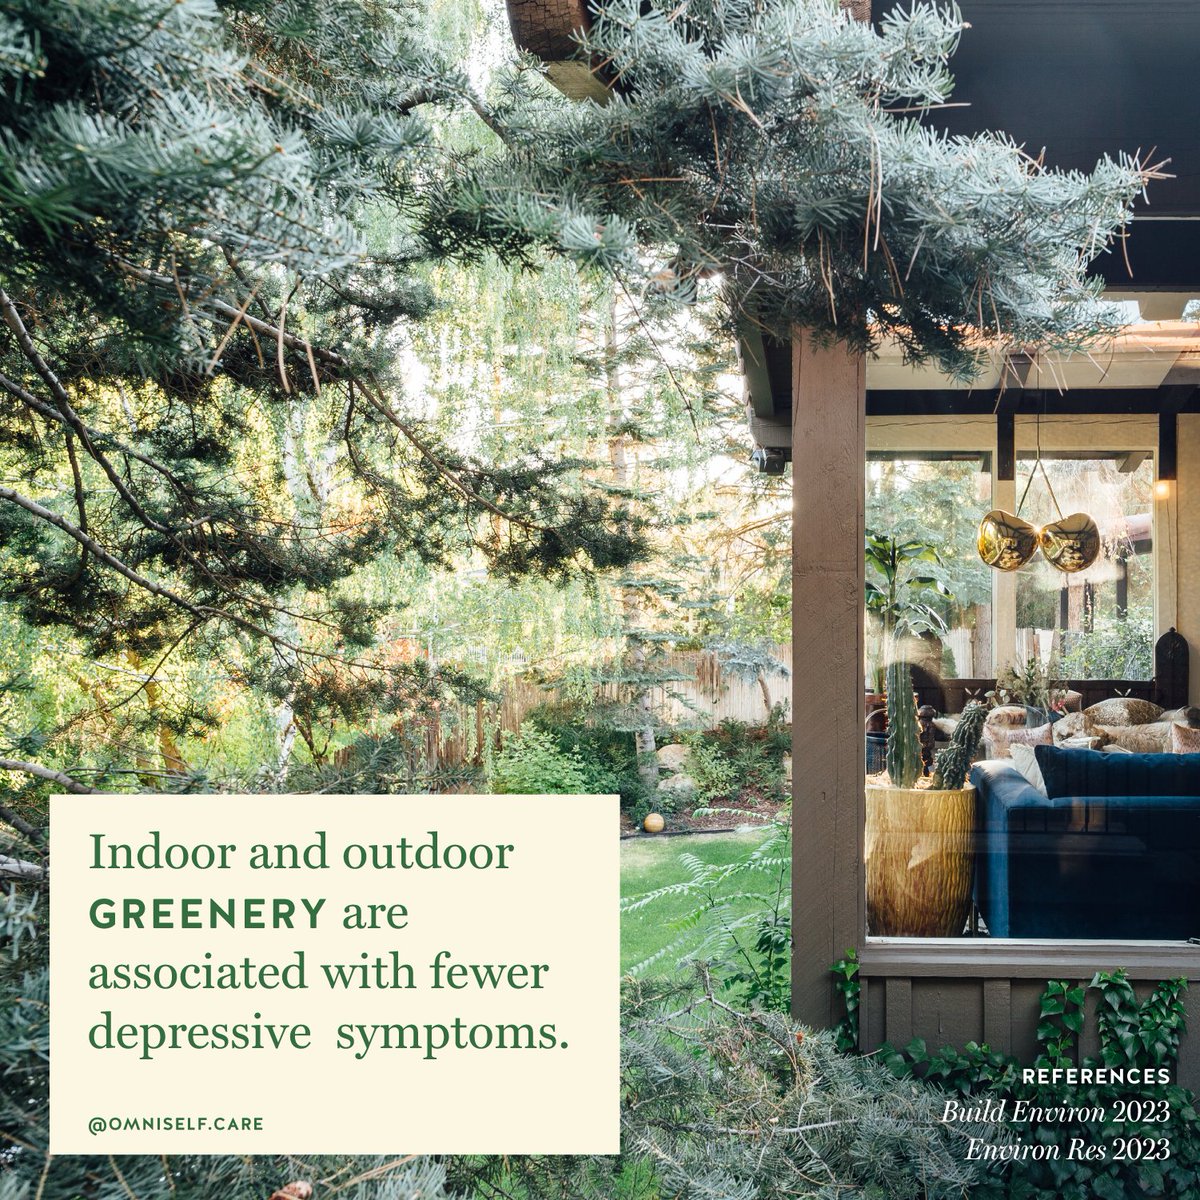 #biophilicdesign  and #biophilichomes support #mentalhealth #prevention and #publichealth - explore our #healtheducation campaign #healthydwelling2030 in our press release: tinyurl.com/4r87ukbk